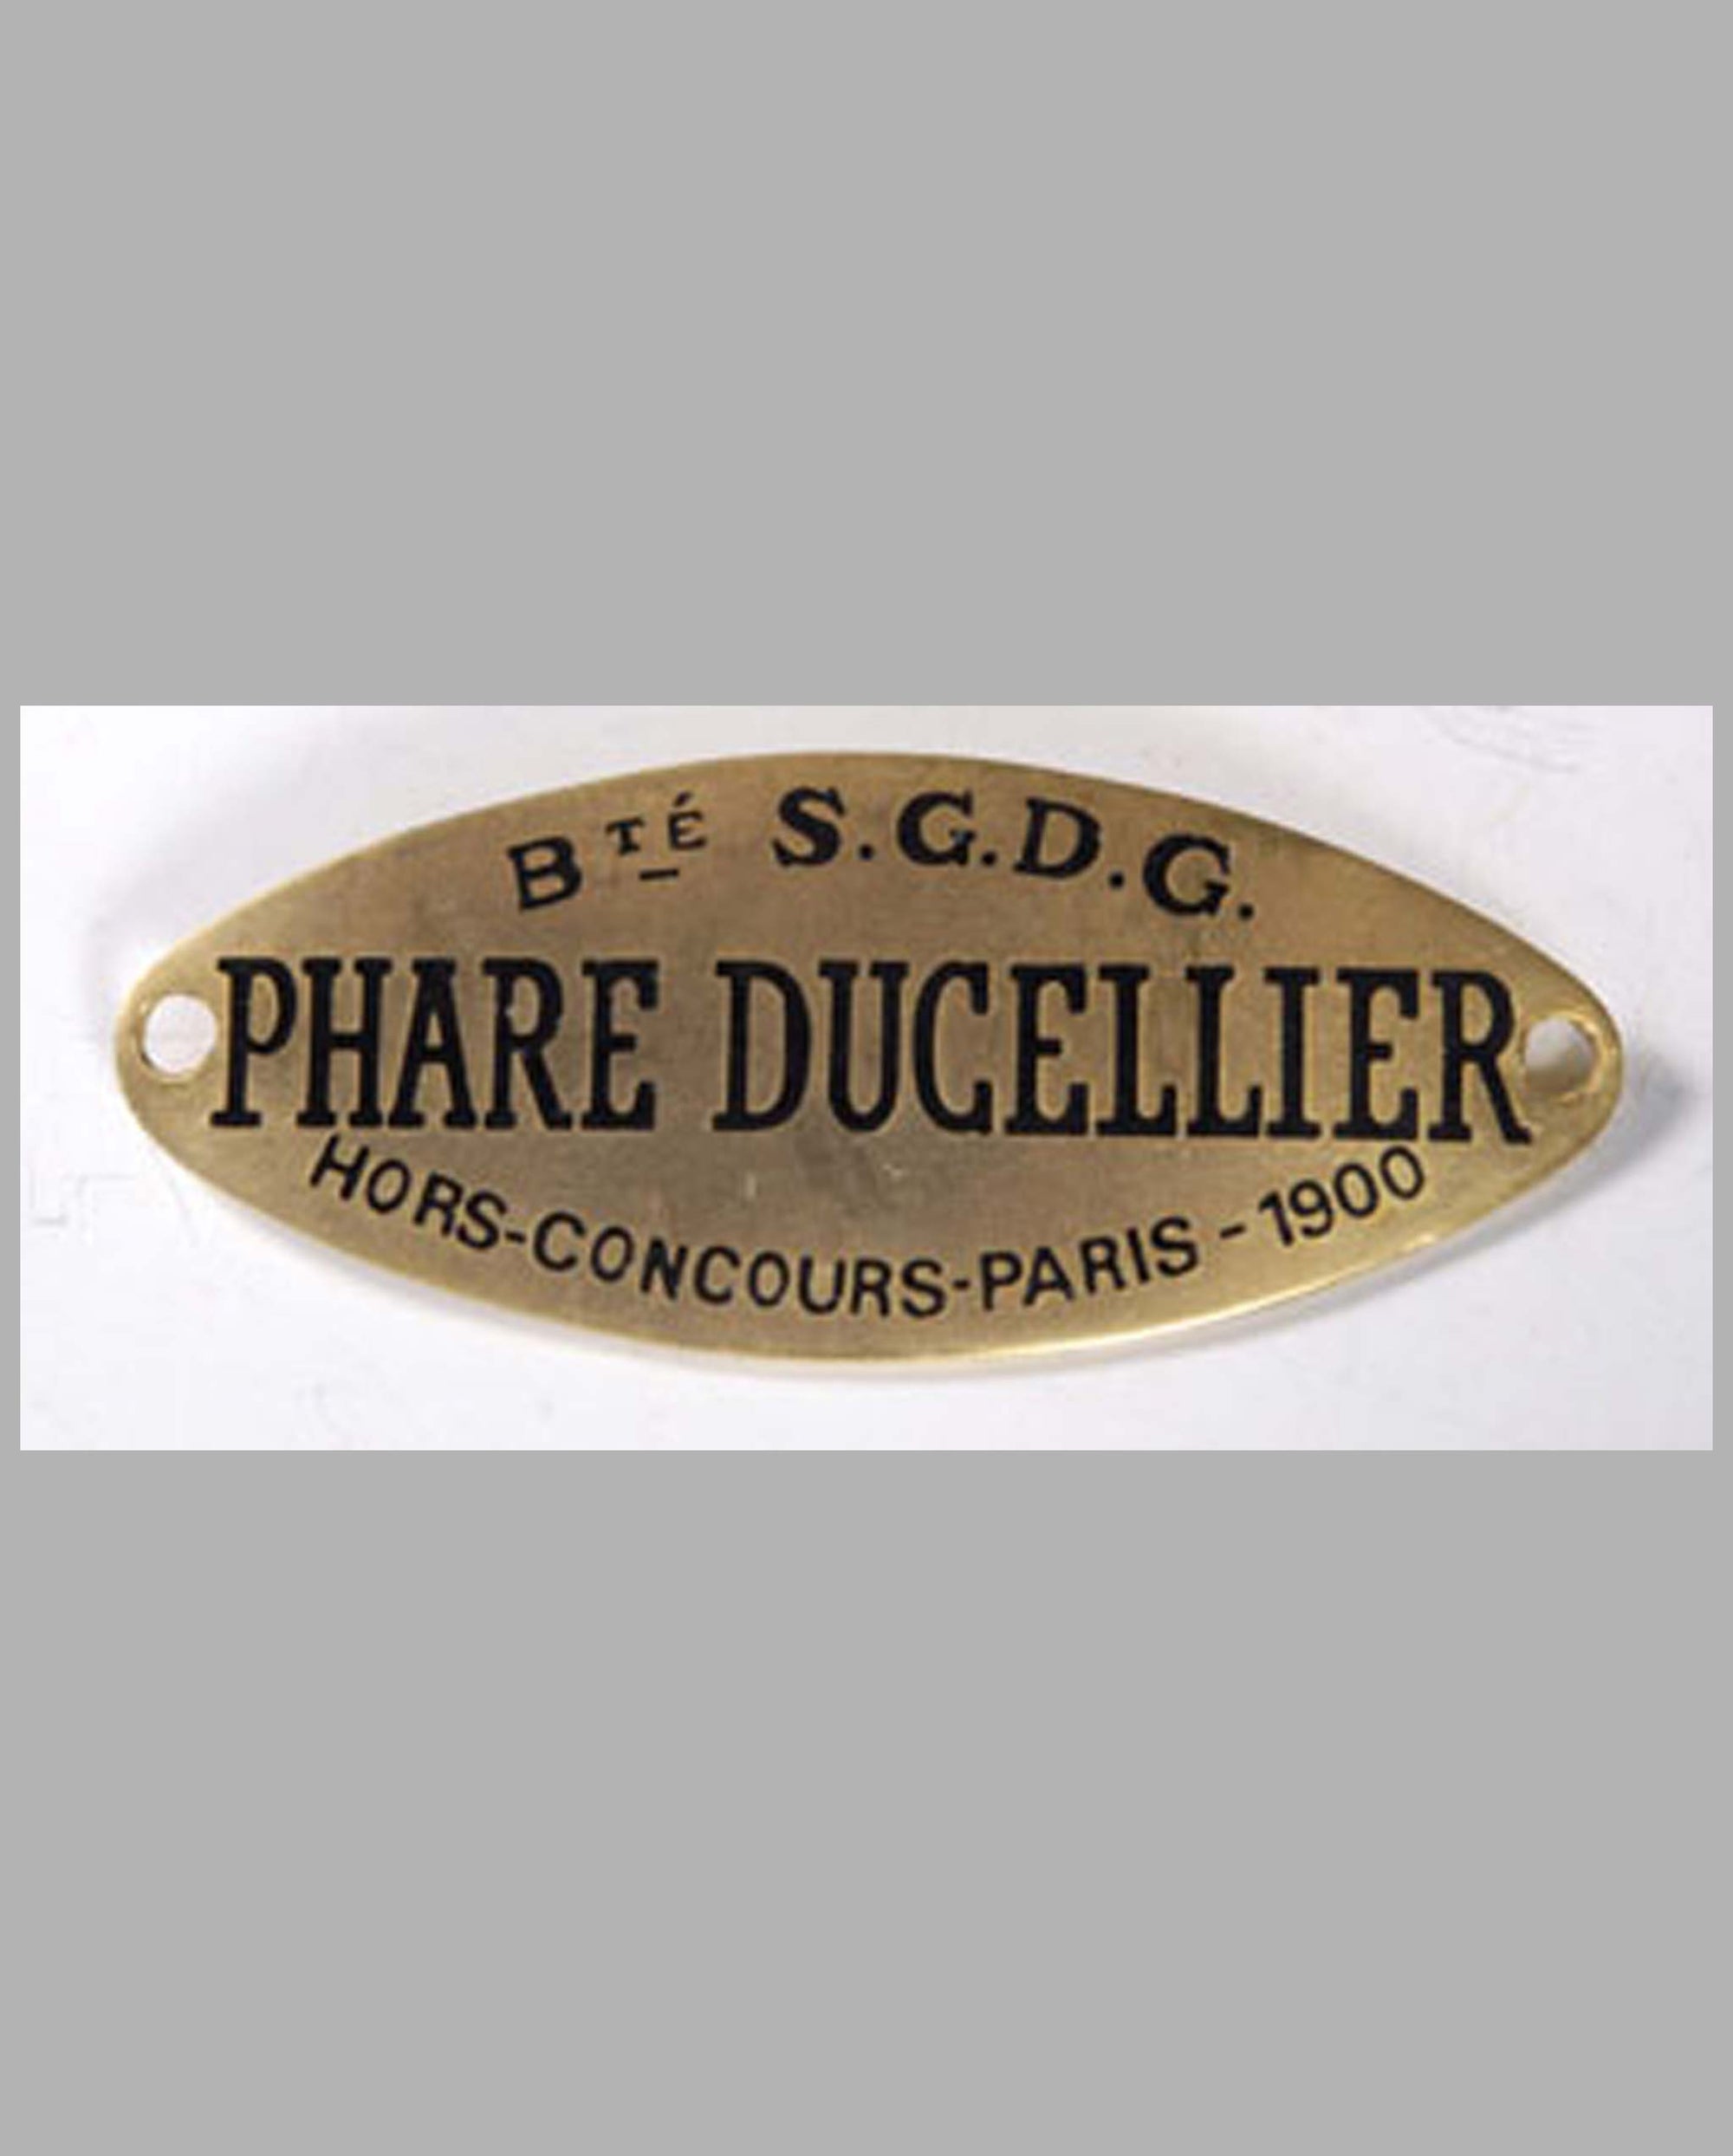 Ducellier headlight maker name tag